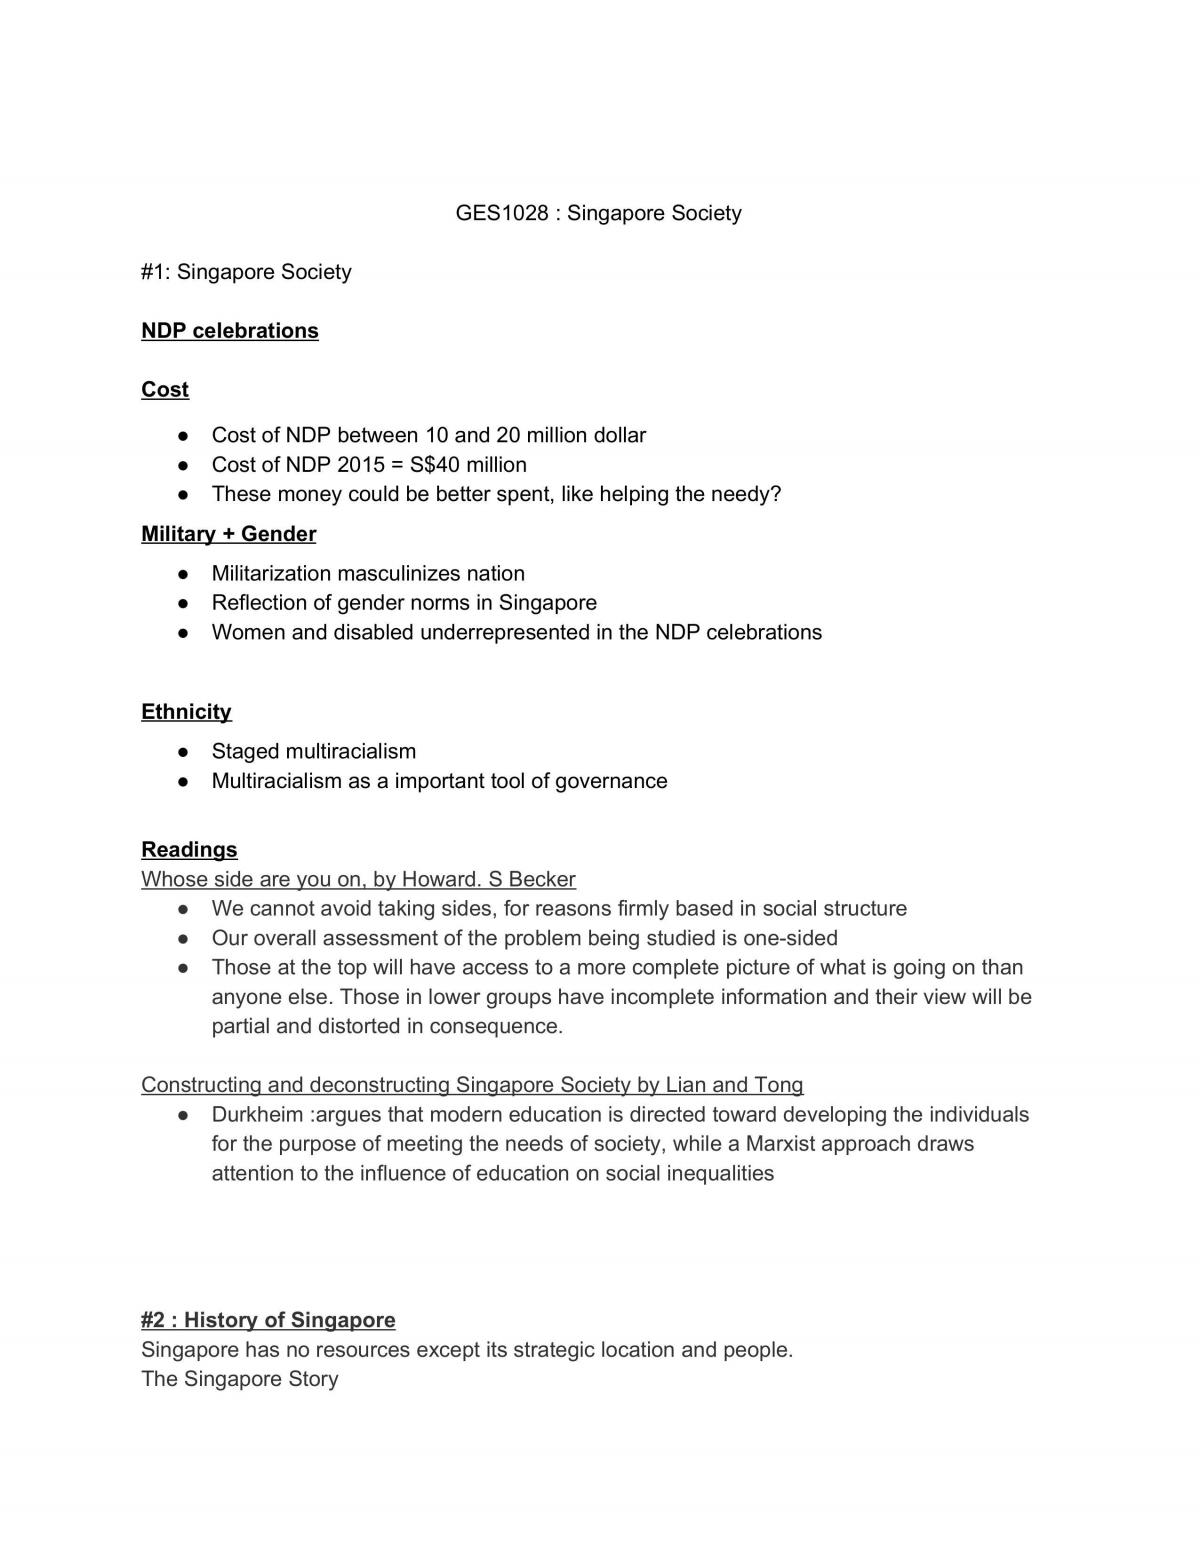 GES1028 Study Notes - Page 1